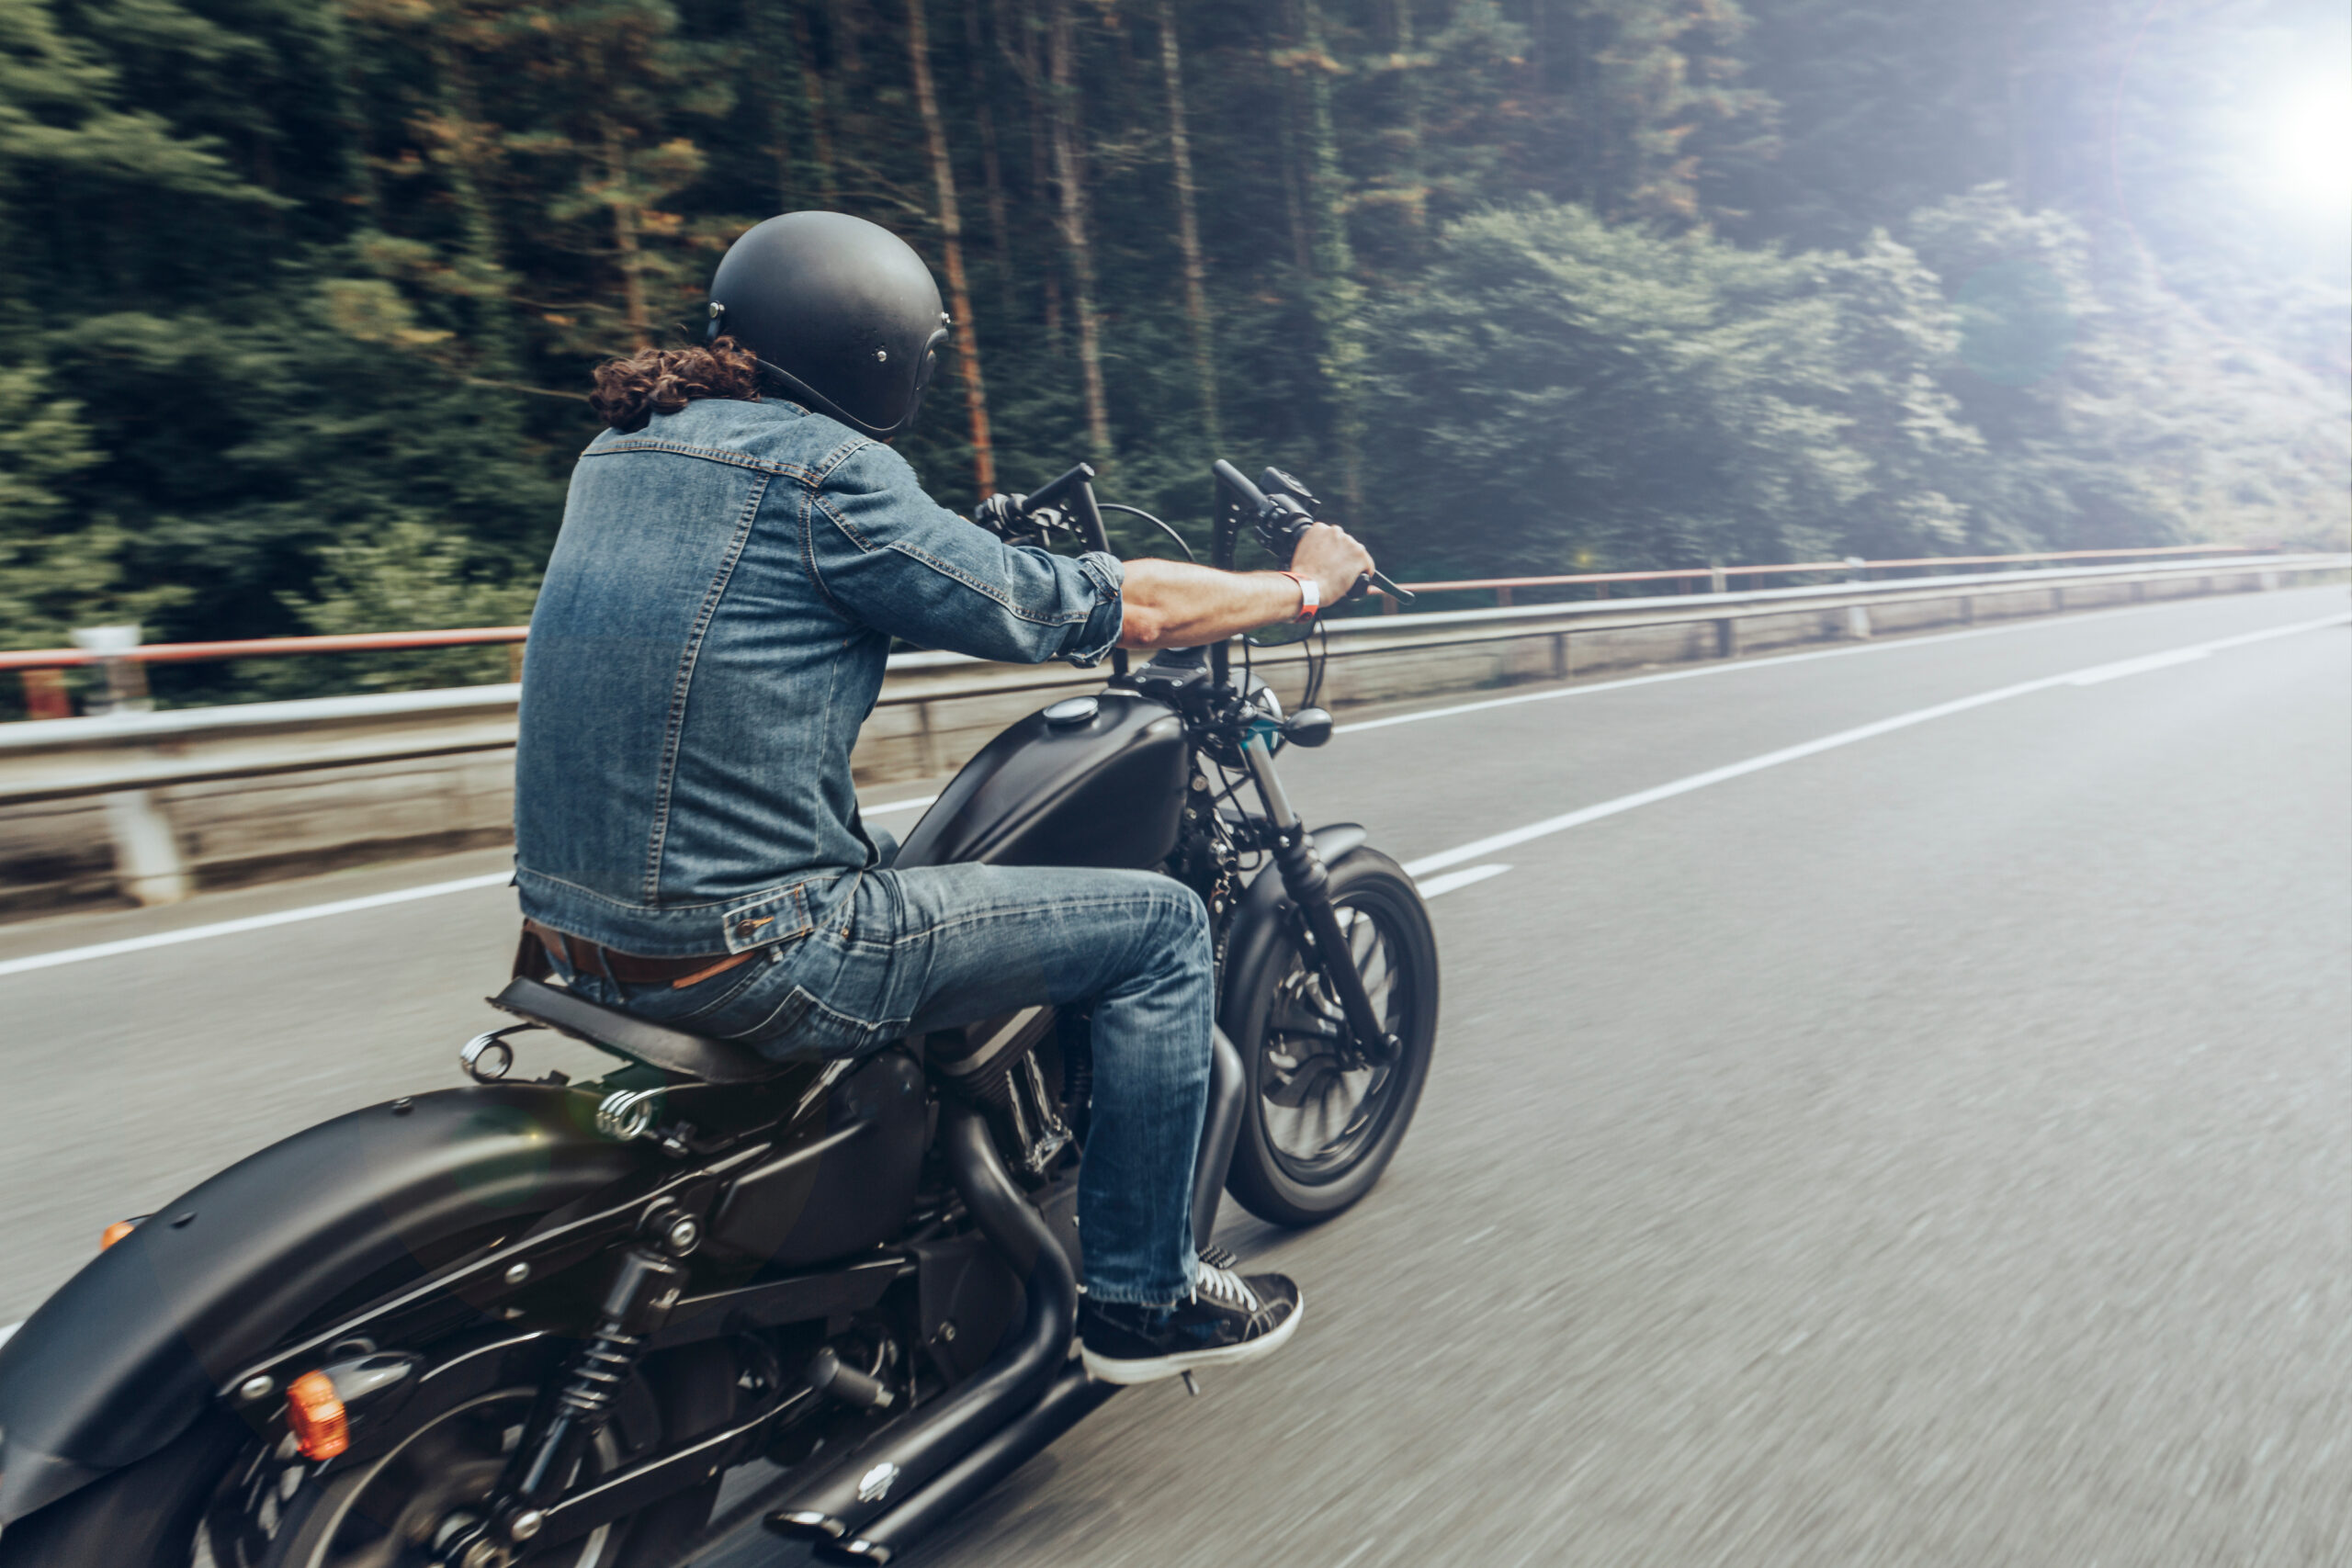 Motorcycle rider wearing a helmet, jean jacket and jeans, riding on a road near trees